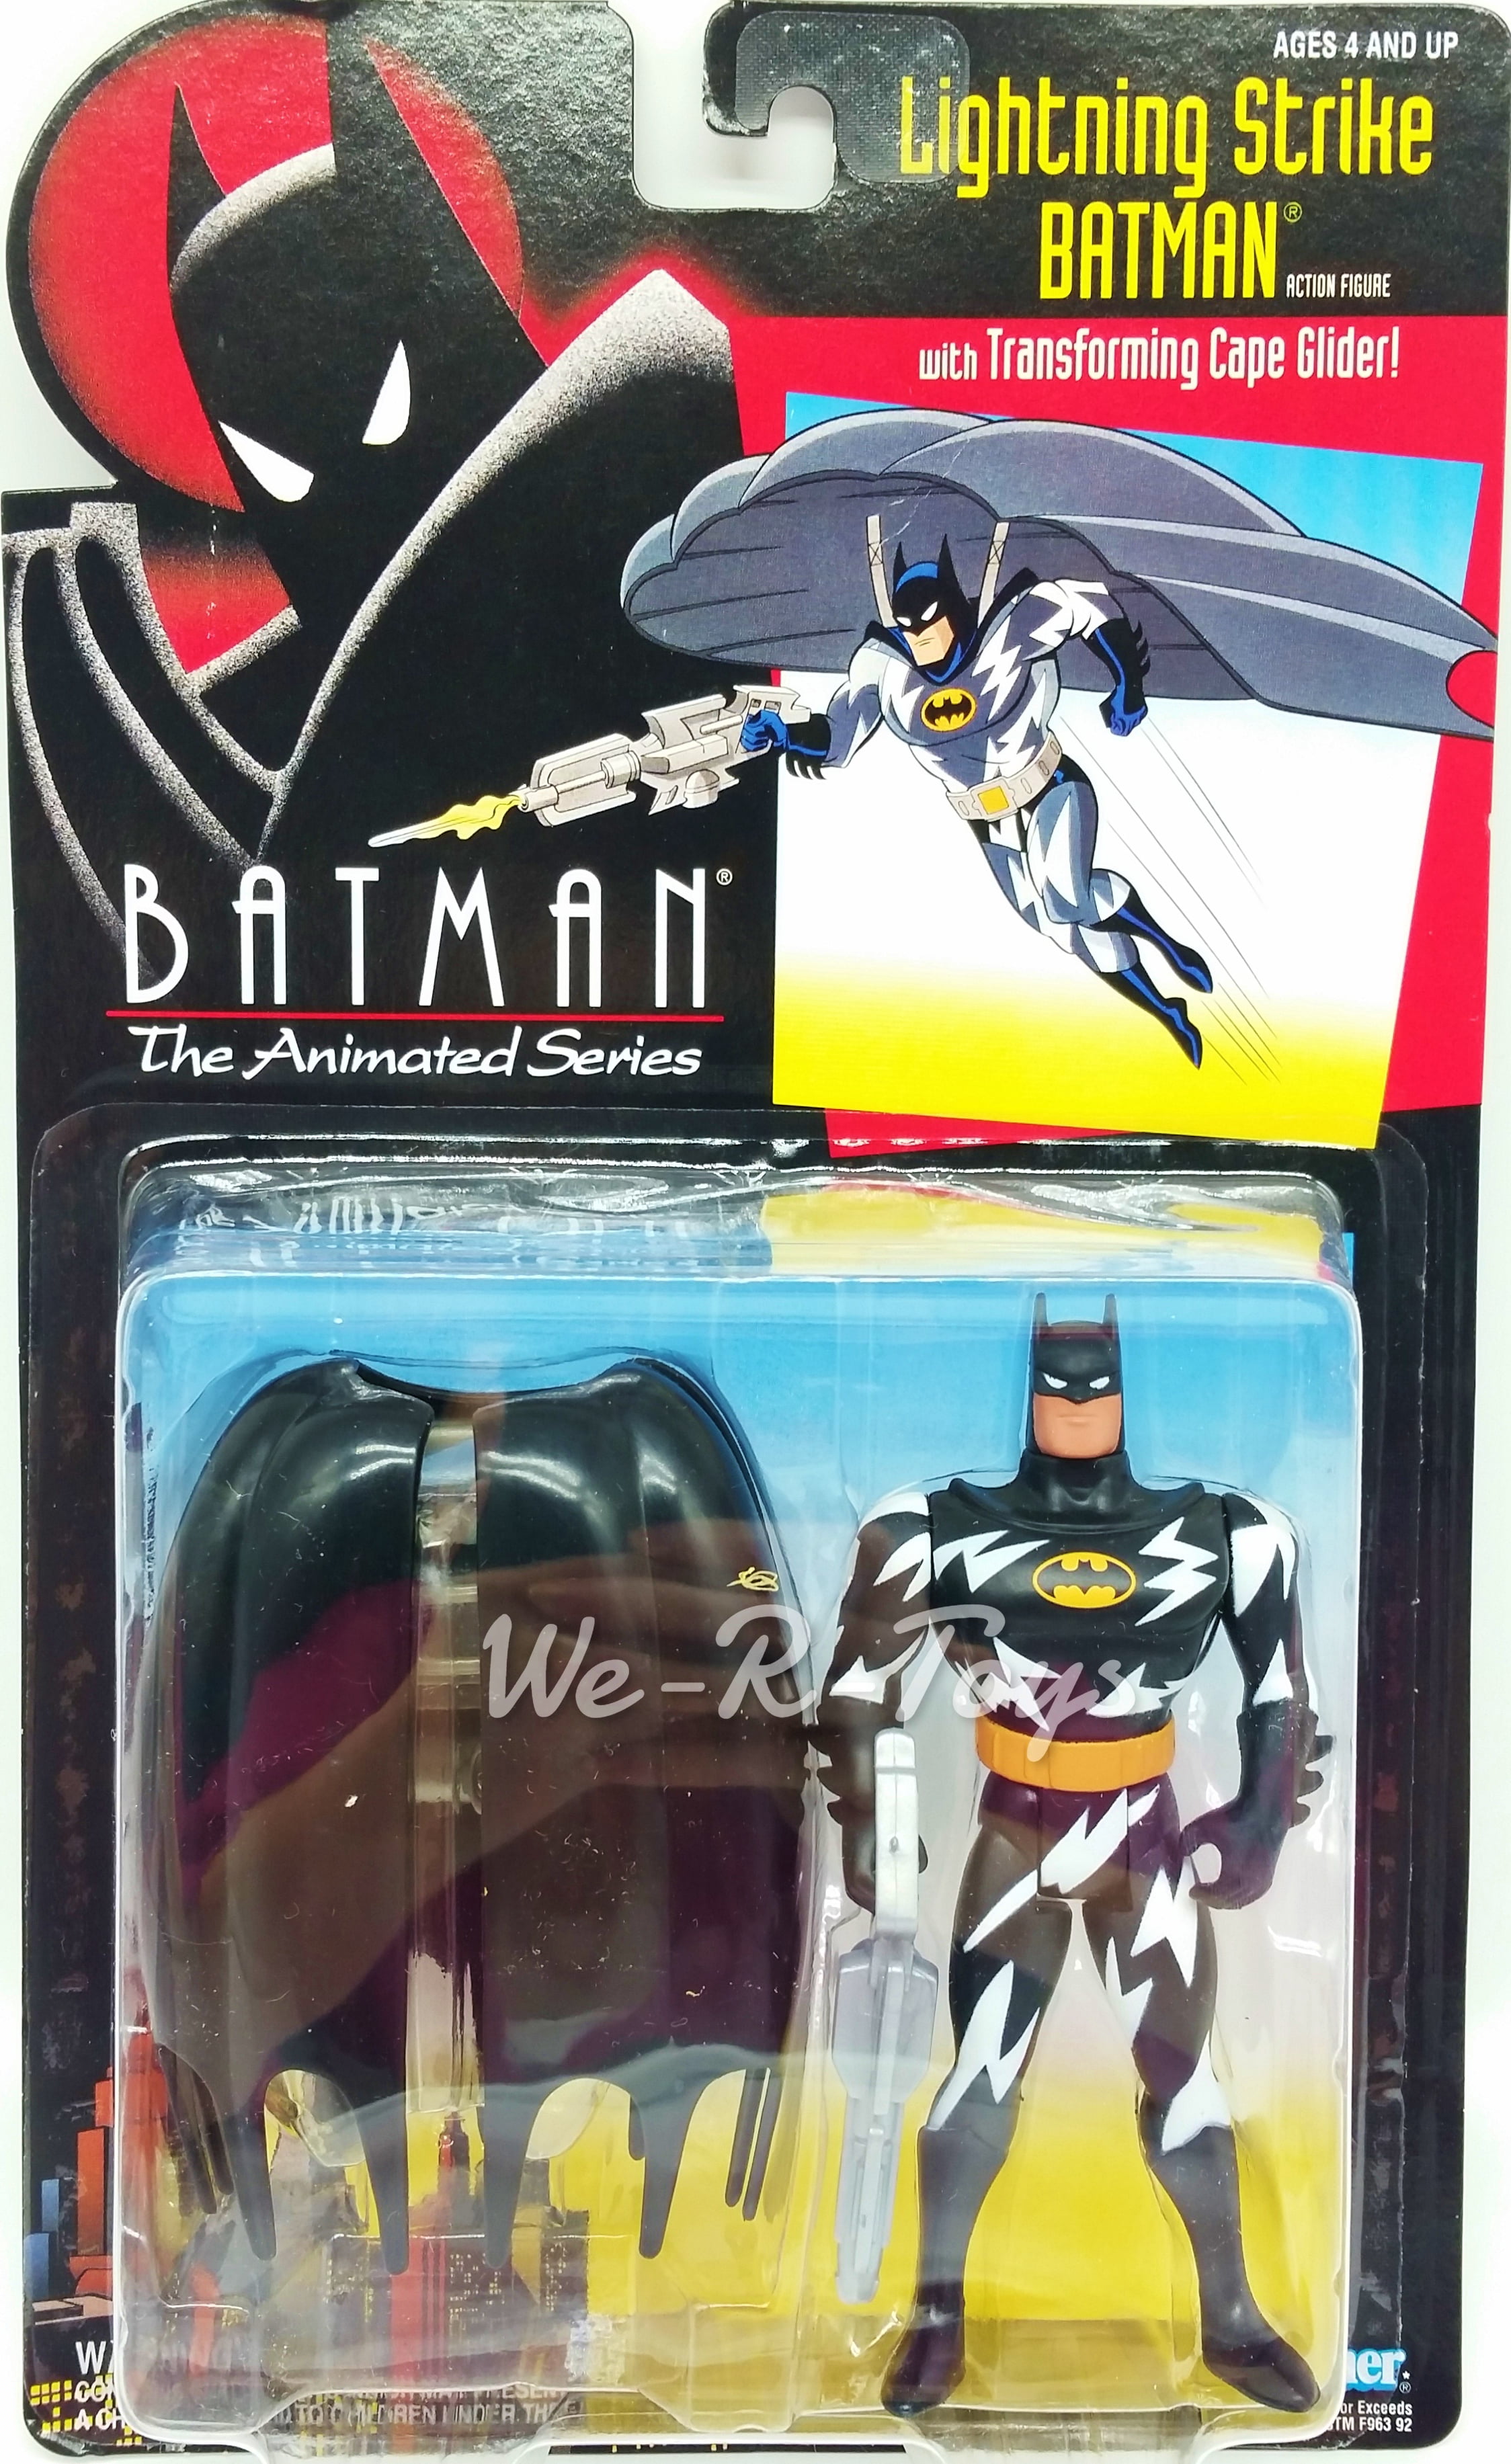 BATMAN THE ANIMATED SERIES DIE CAST MODELS & FIGURE SET MADE IN 93 